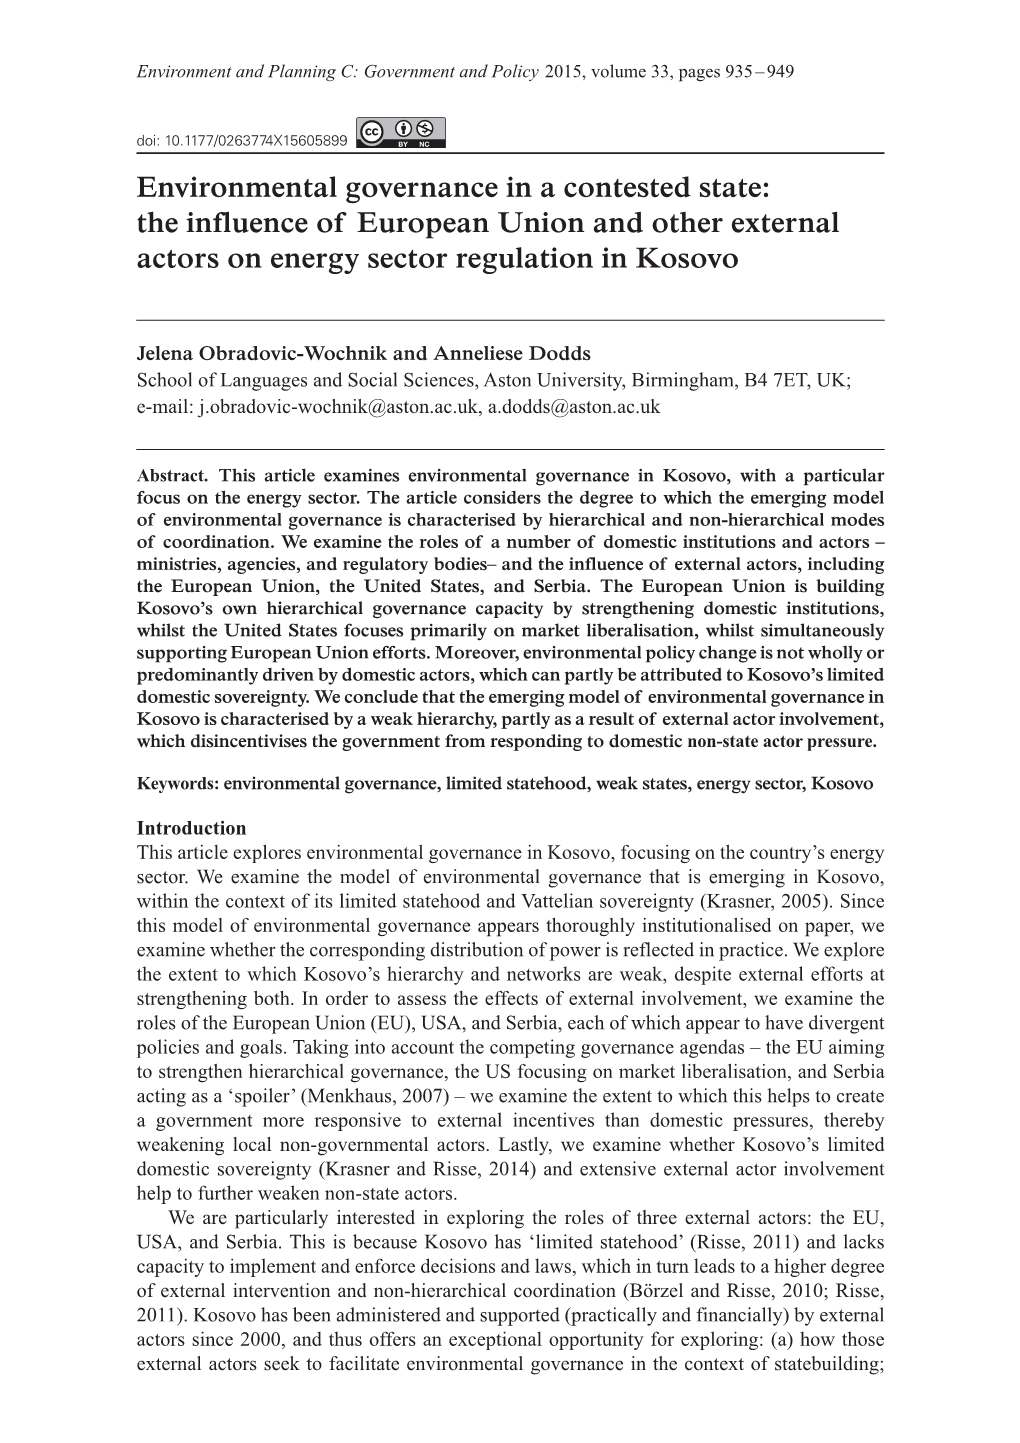 Environmental Governance in a Contested State: the Influence of European Union and Other External Actors on Energy Sector Regulation in Kosovo